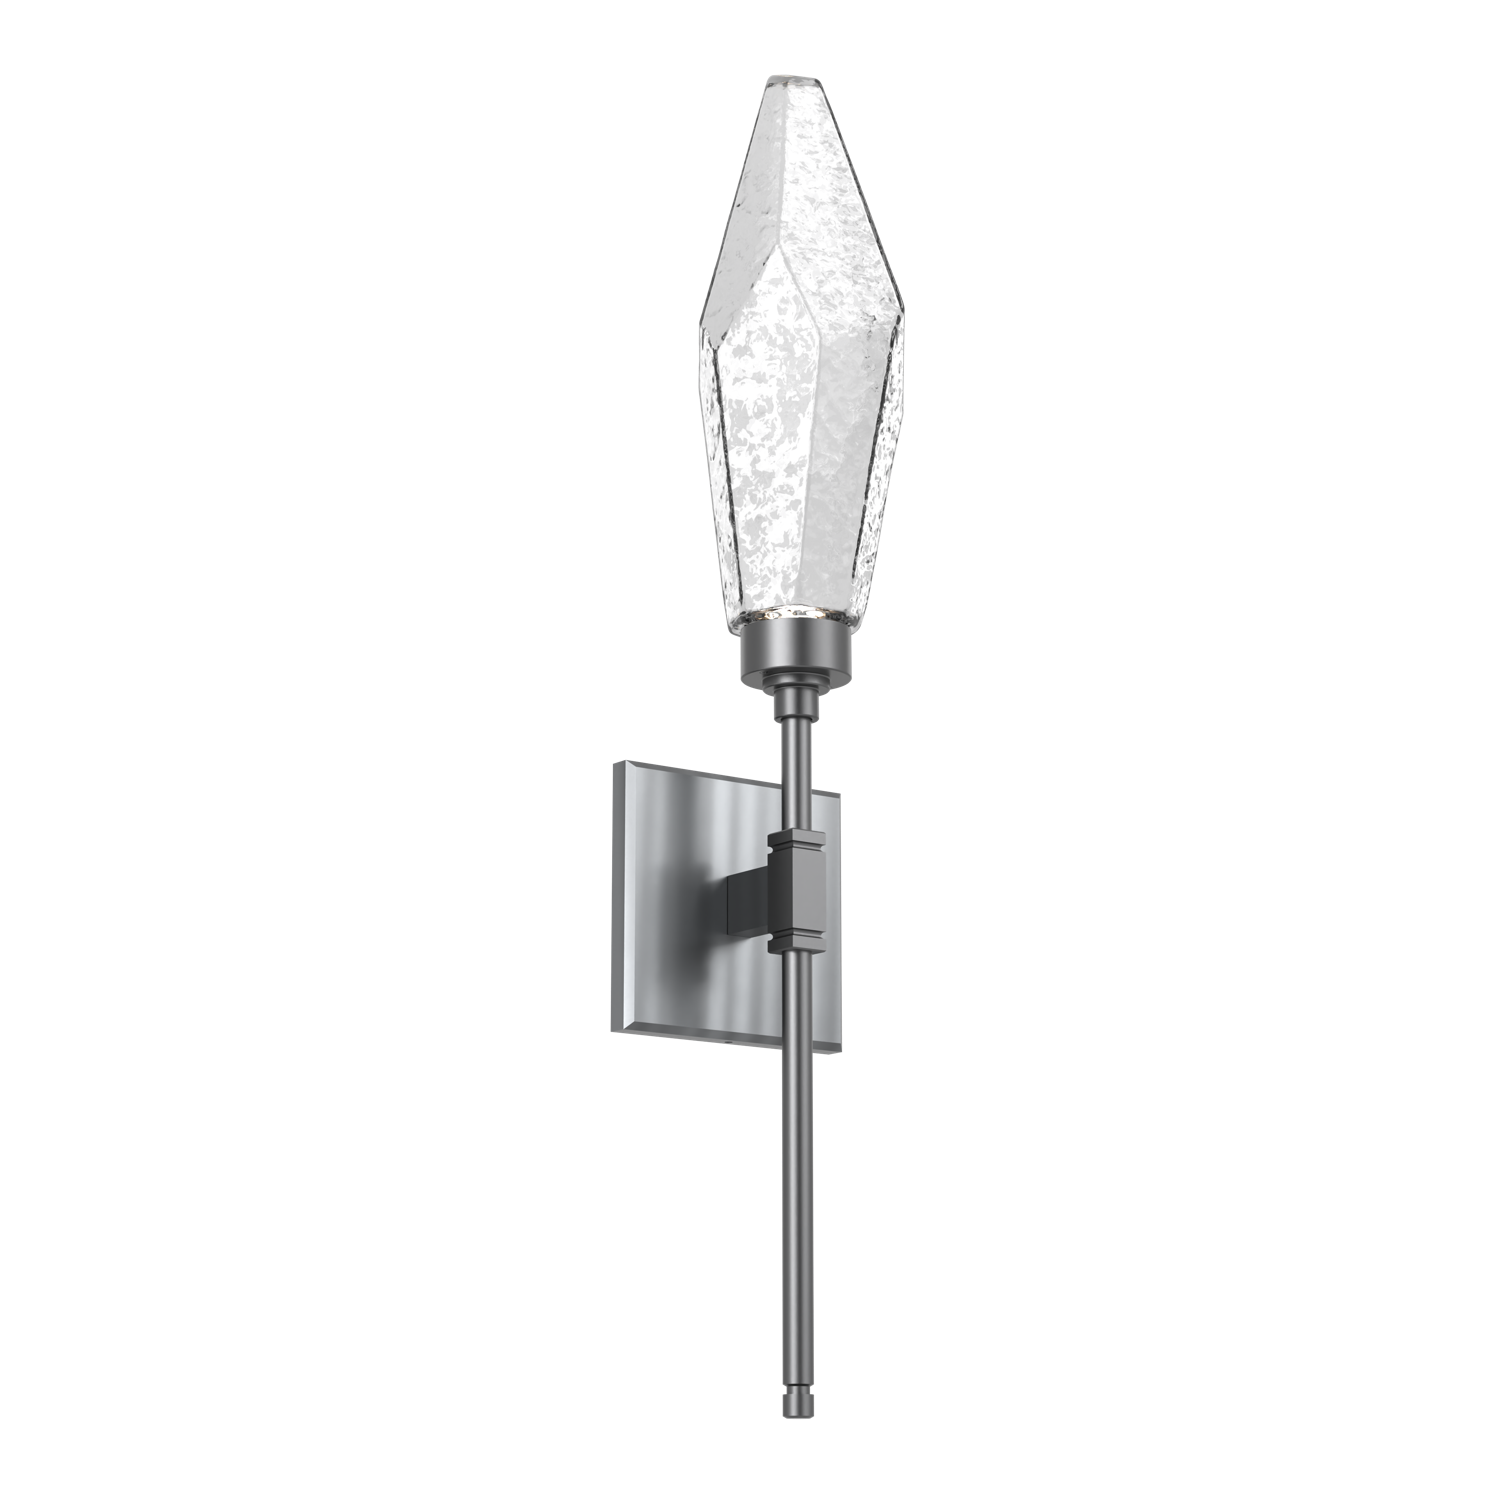 IDB0050-04-GM-CC-Hammerton-Studio-Rock-Crystal-ada-certified-belvedere-wall-sconce-with-gunmetal-finish-and-clear-glass-shades-and-LED-lamping